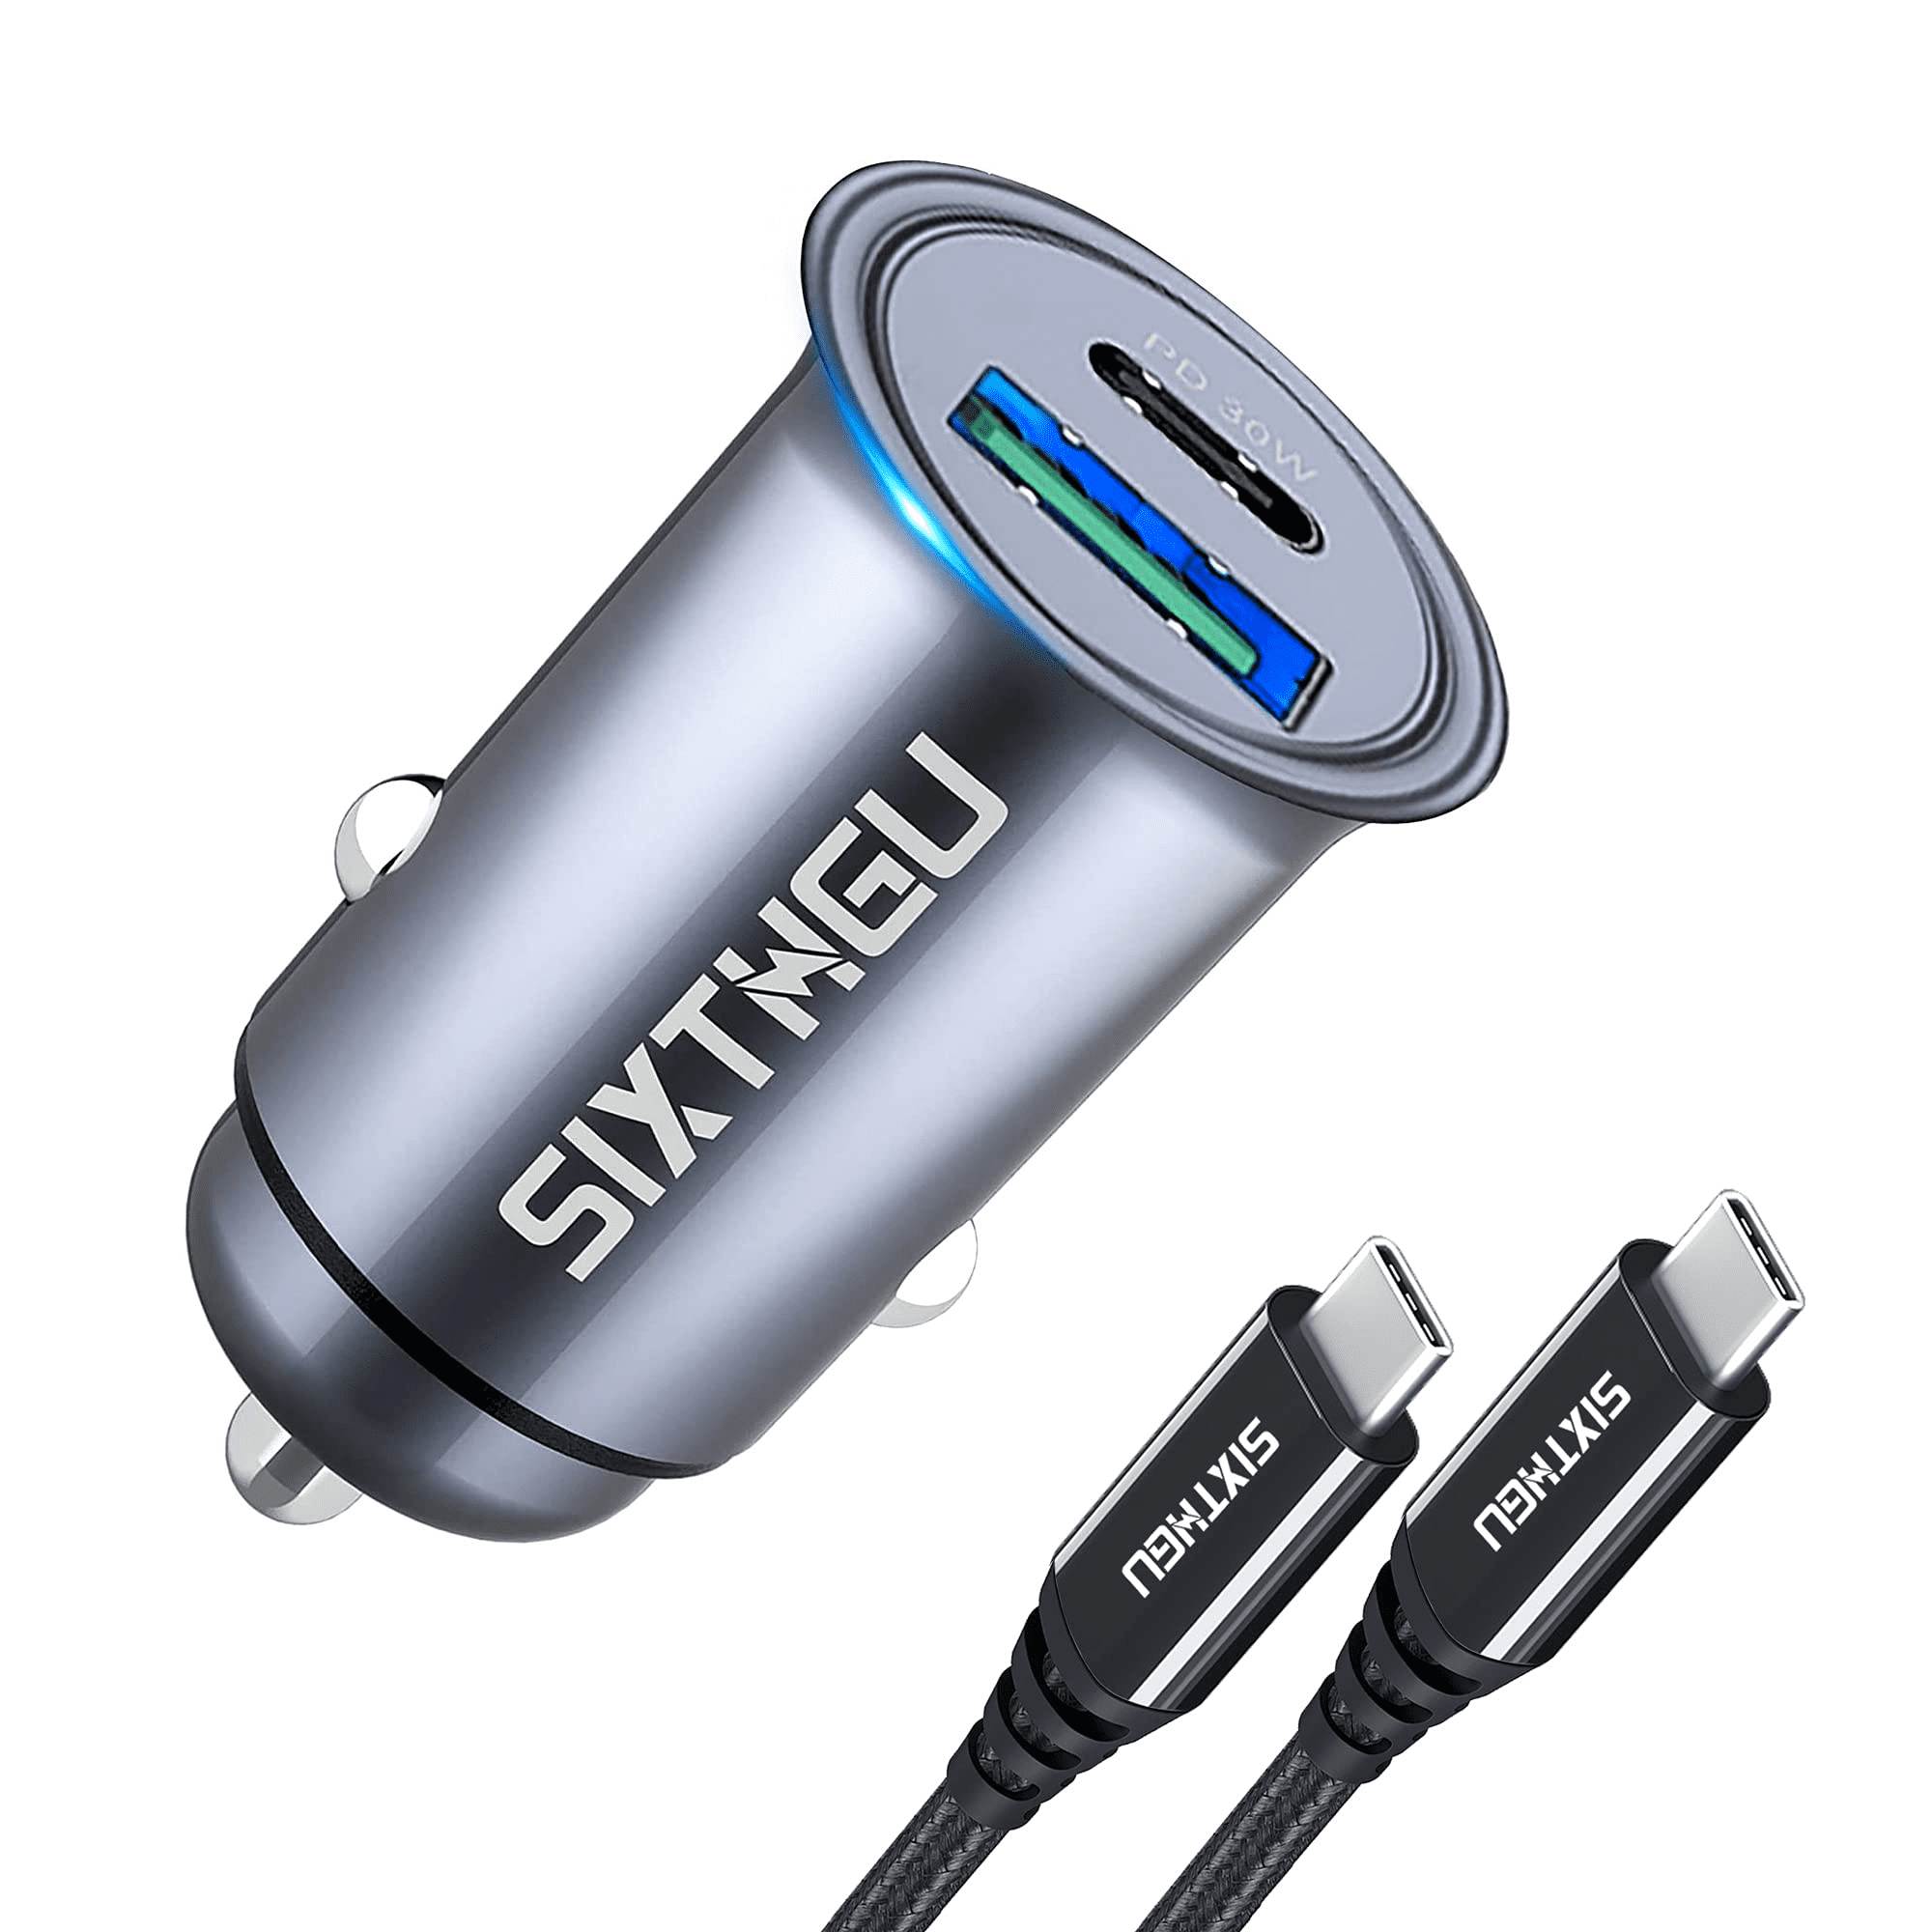 Hi-ERA USB C Car Charger 12V 24V Dual QC 3.0 USB Quick Charge Adapter Type C Power Delivery 32W in Total Fast Charges with LED LCD Display Low Voltage Warning for Samsung iPhone LG Google and More 